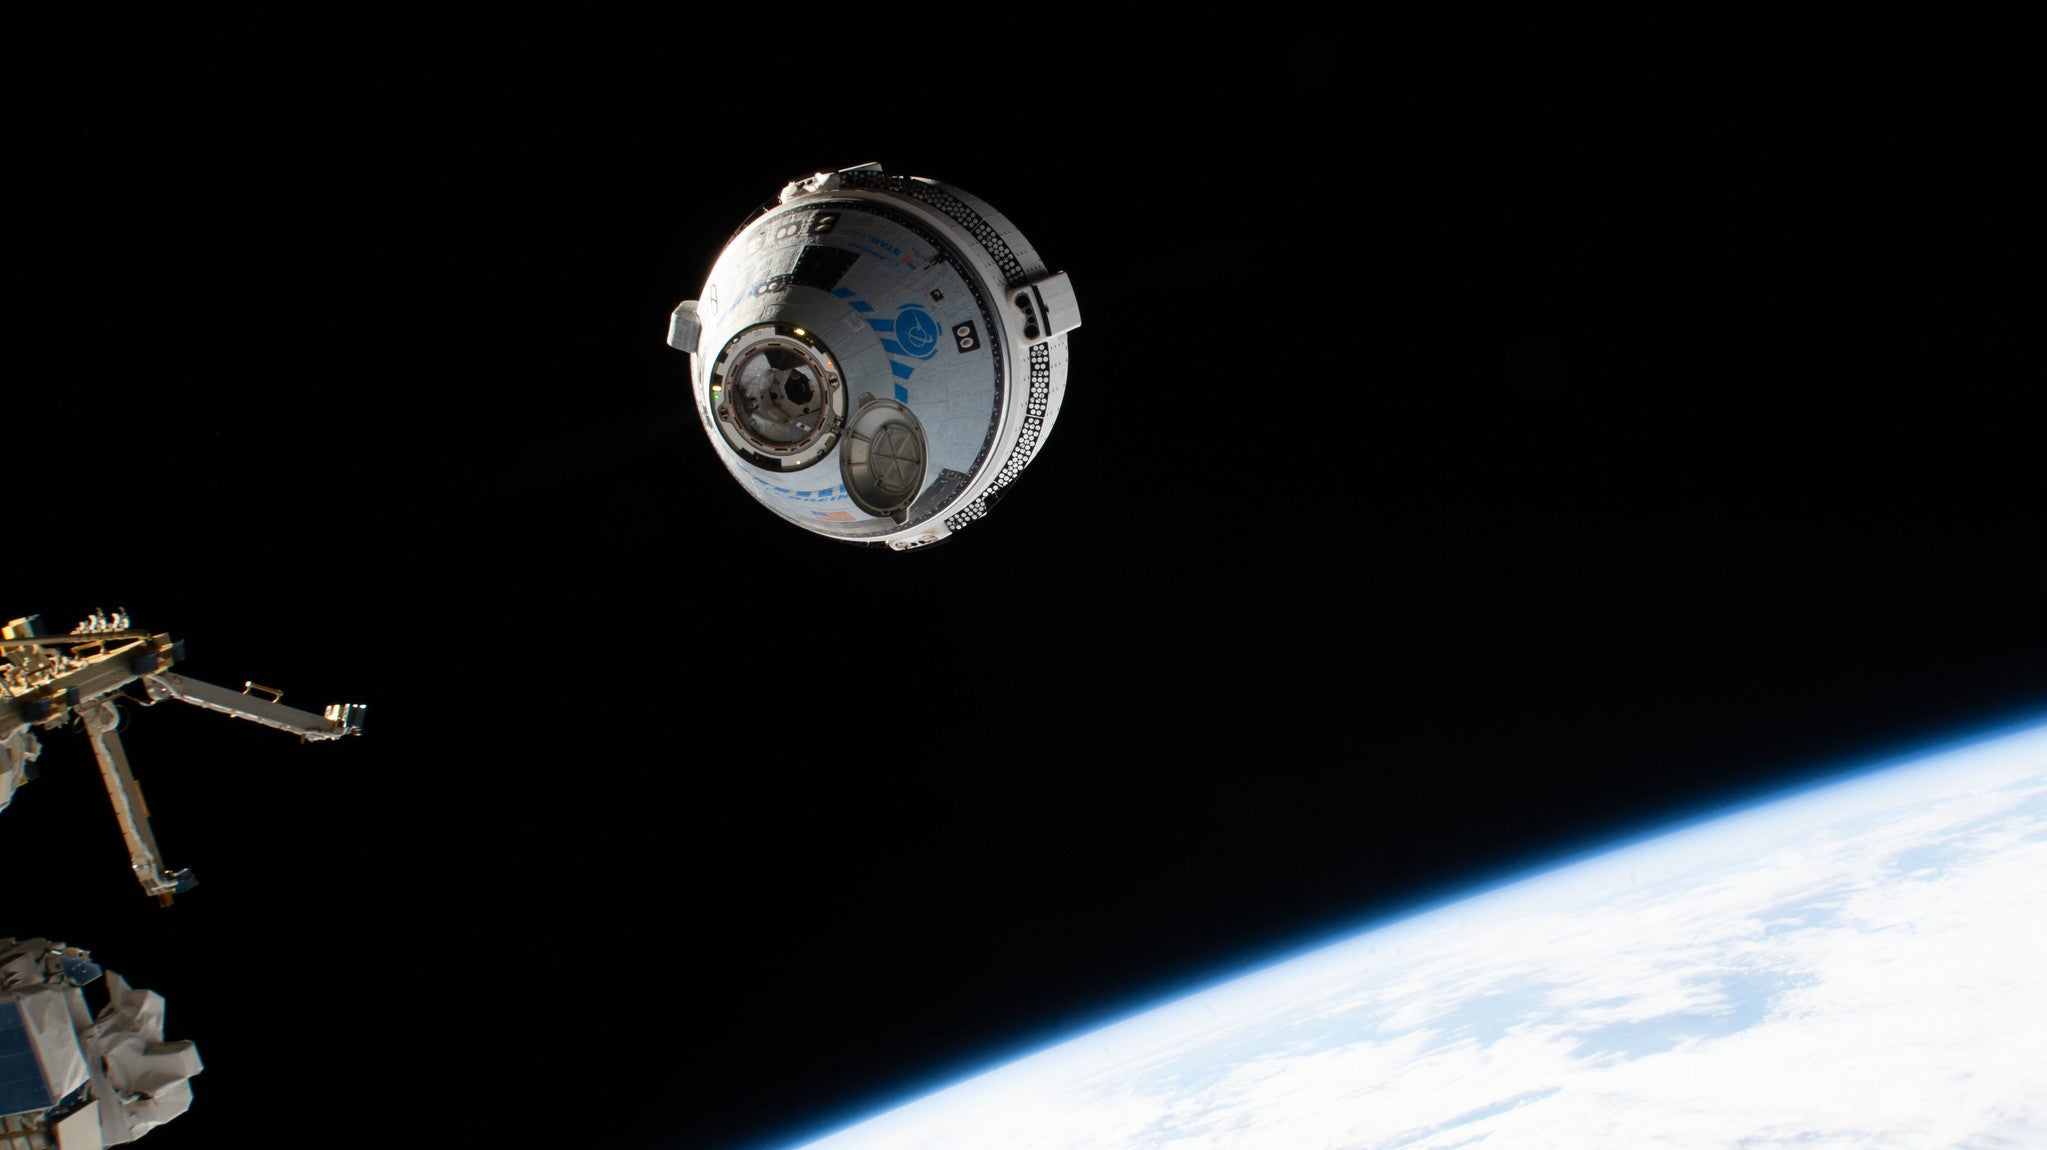 Boeing's Starliner capsule approaching the ISS on May 20, 2022. (Photo: NASA)